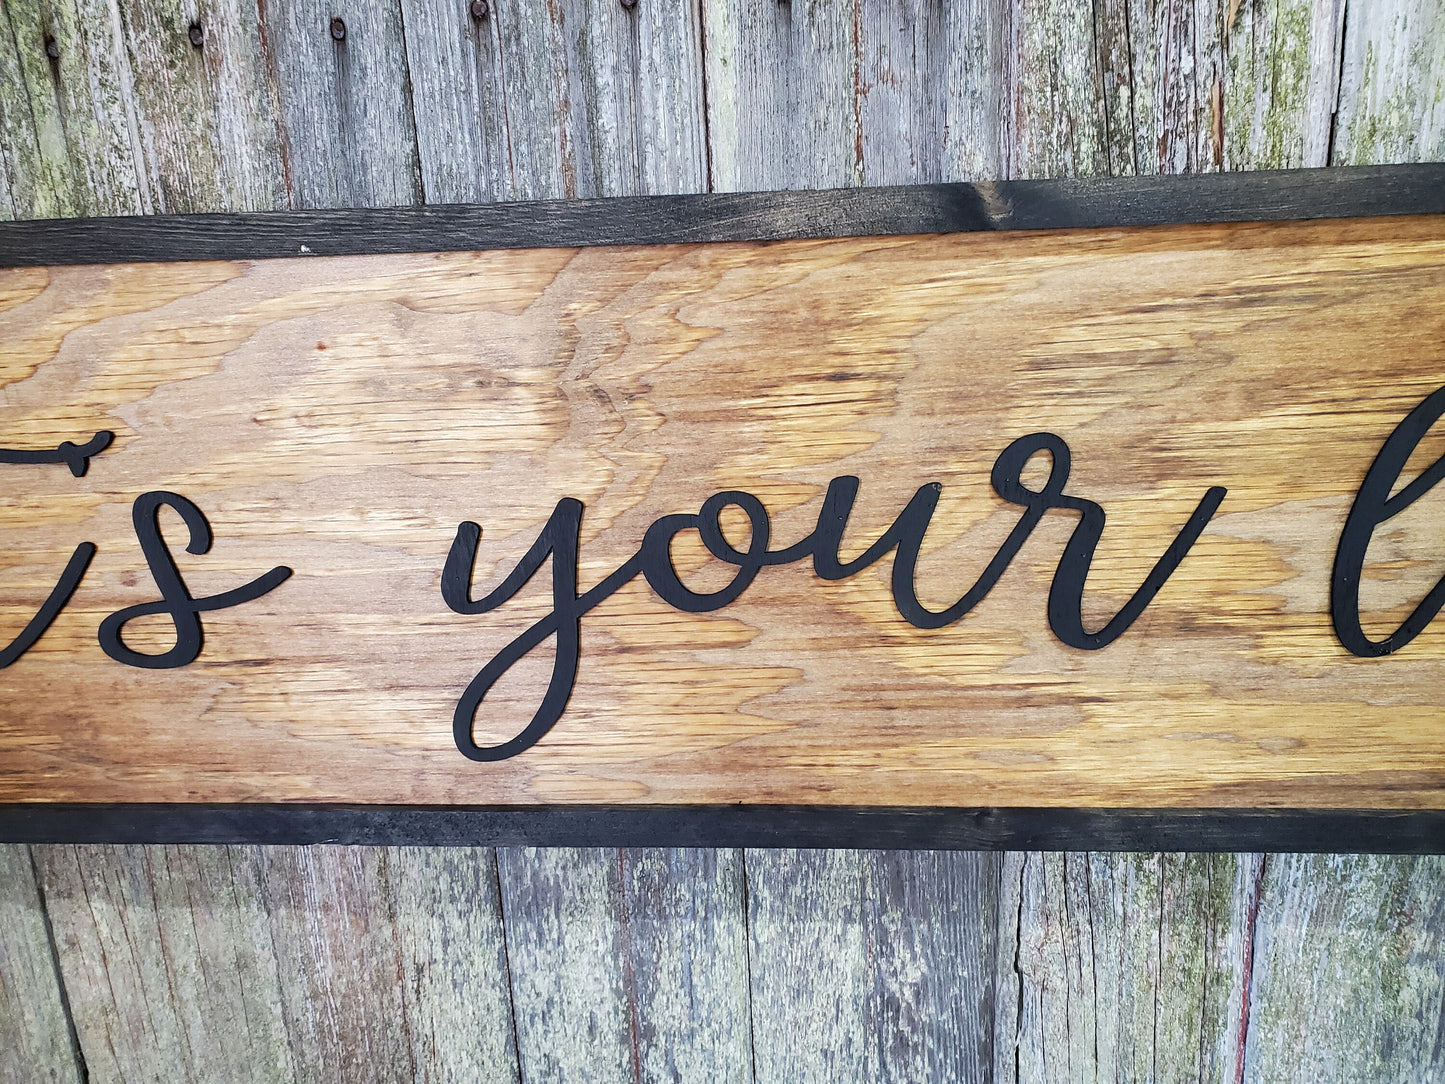 Its Your Love Large Custom Established Sign Wedding Gift Country Rustic Wood 3D Raised Text Wooden Framed Shabby Chic Cabin Decor